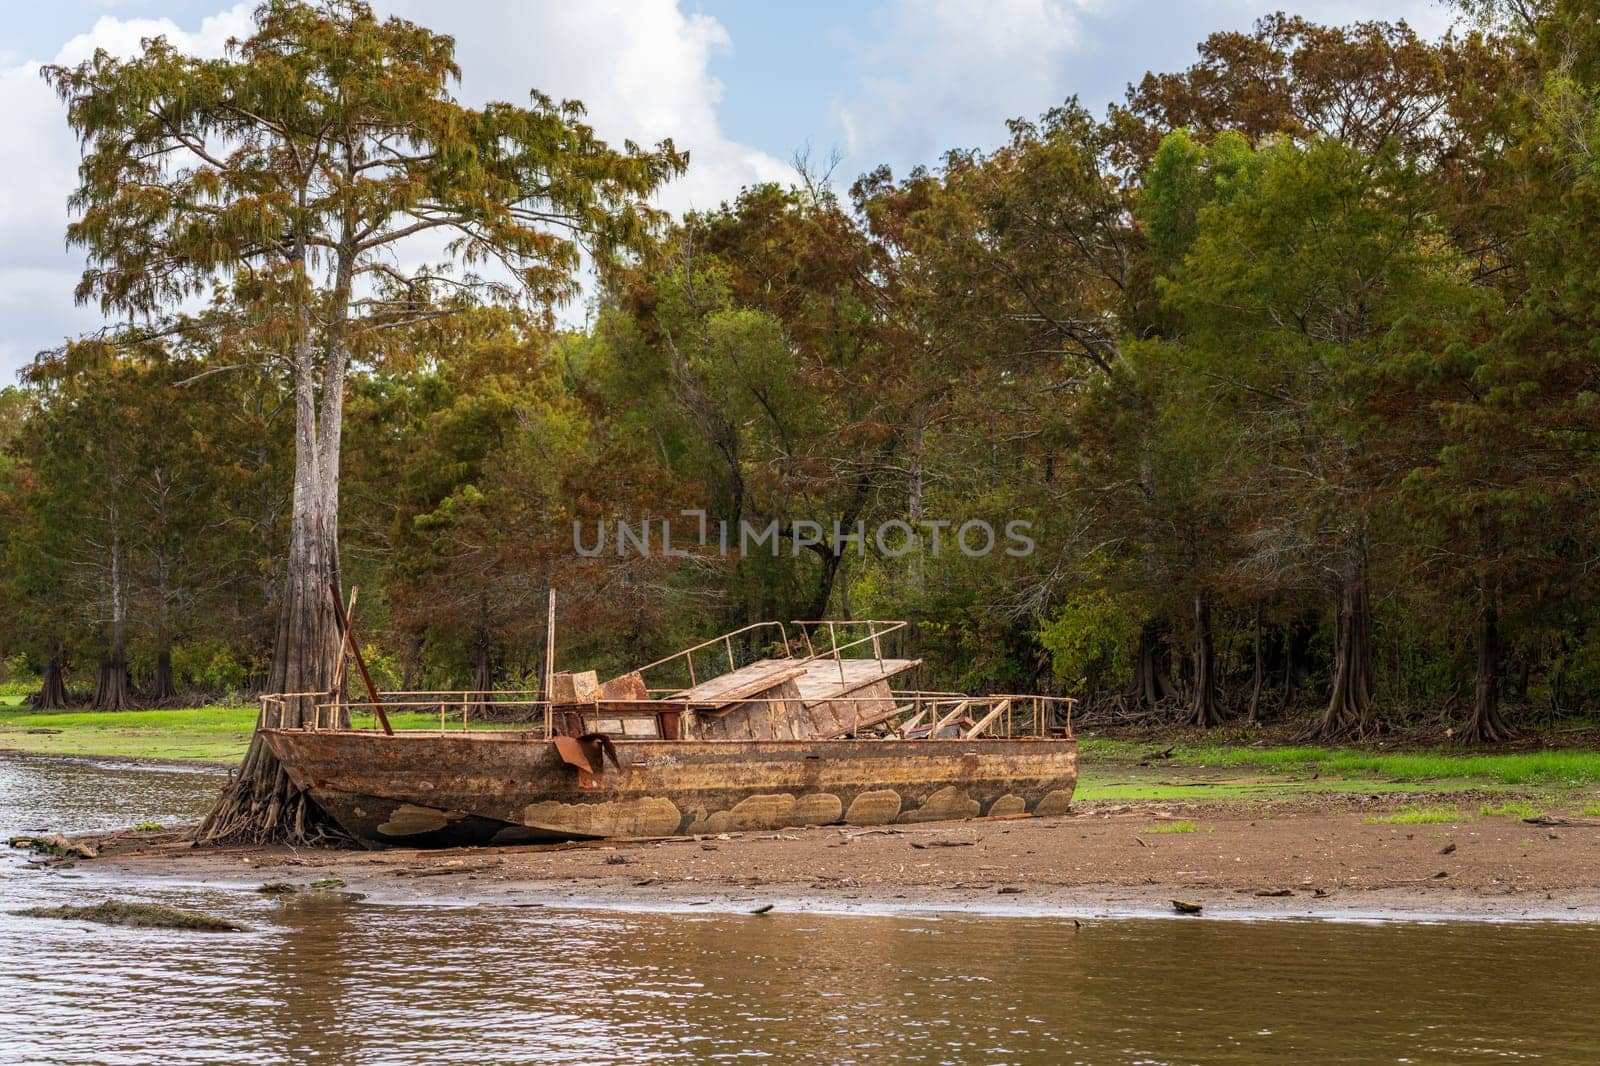 Abandoned boat rusts on the banks of Atchafalaya basin by steheap